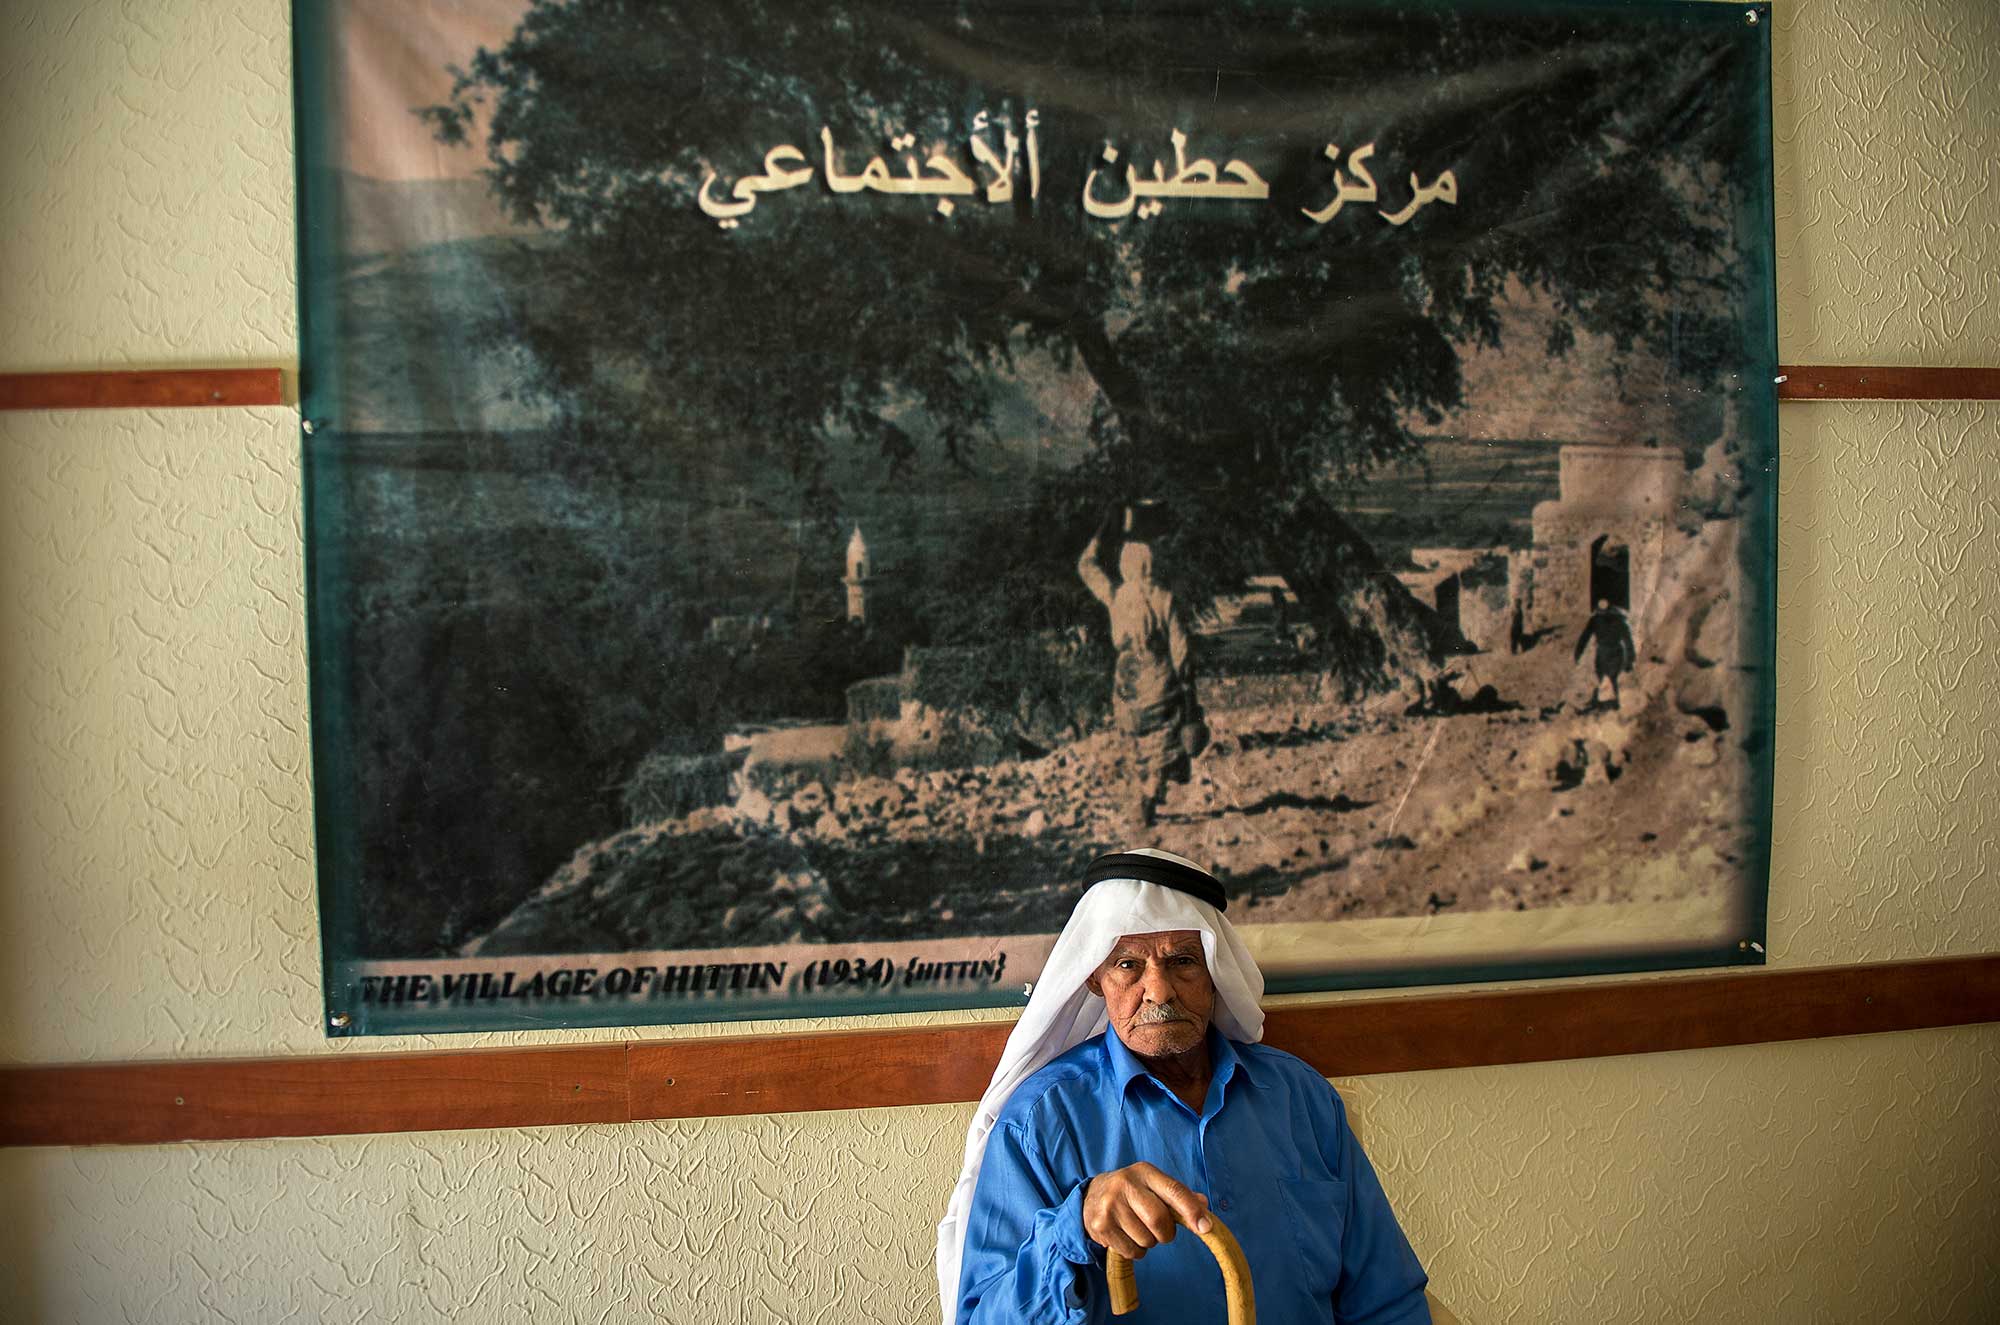 Palestinian refugee sitting in front of a picture of his home village of Hittin in northern Palestine